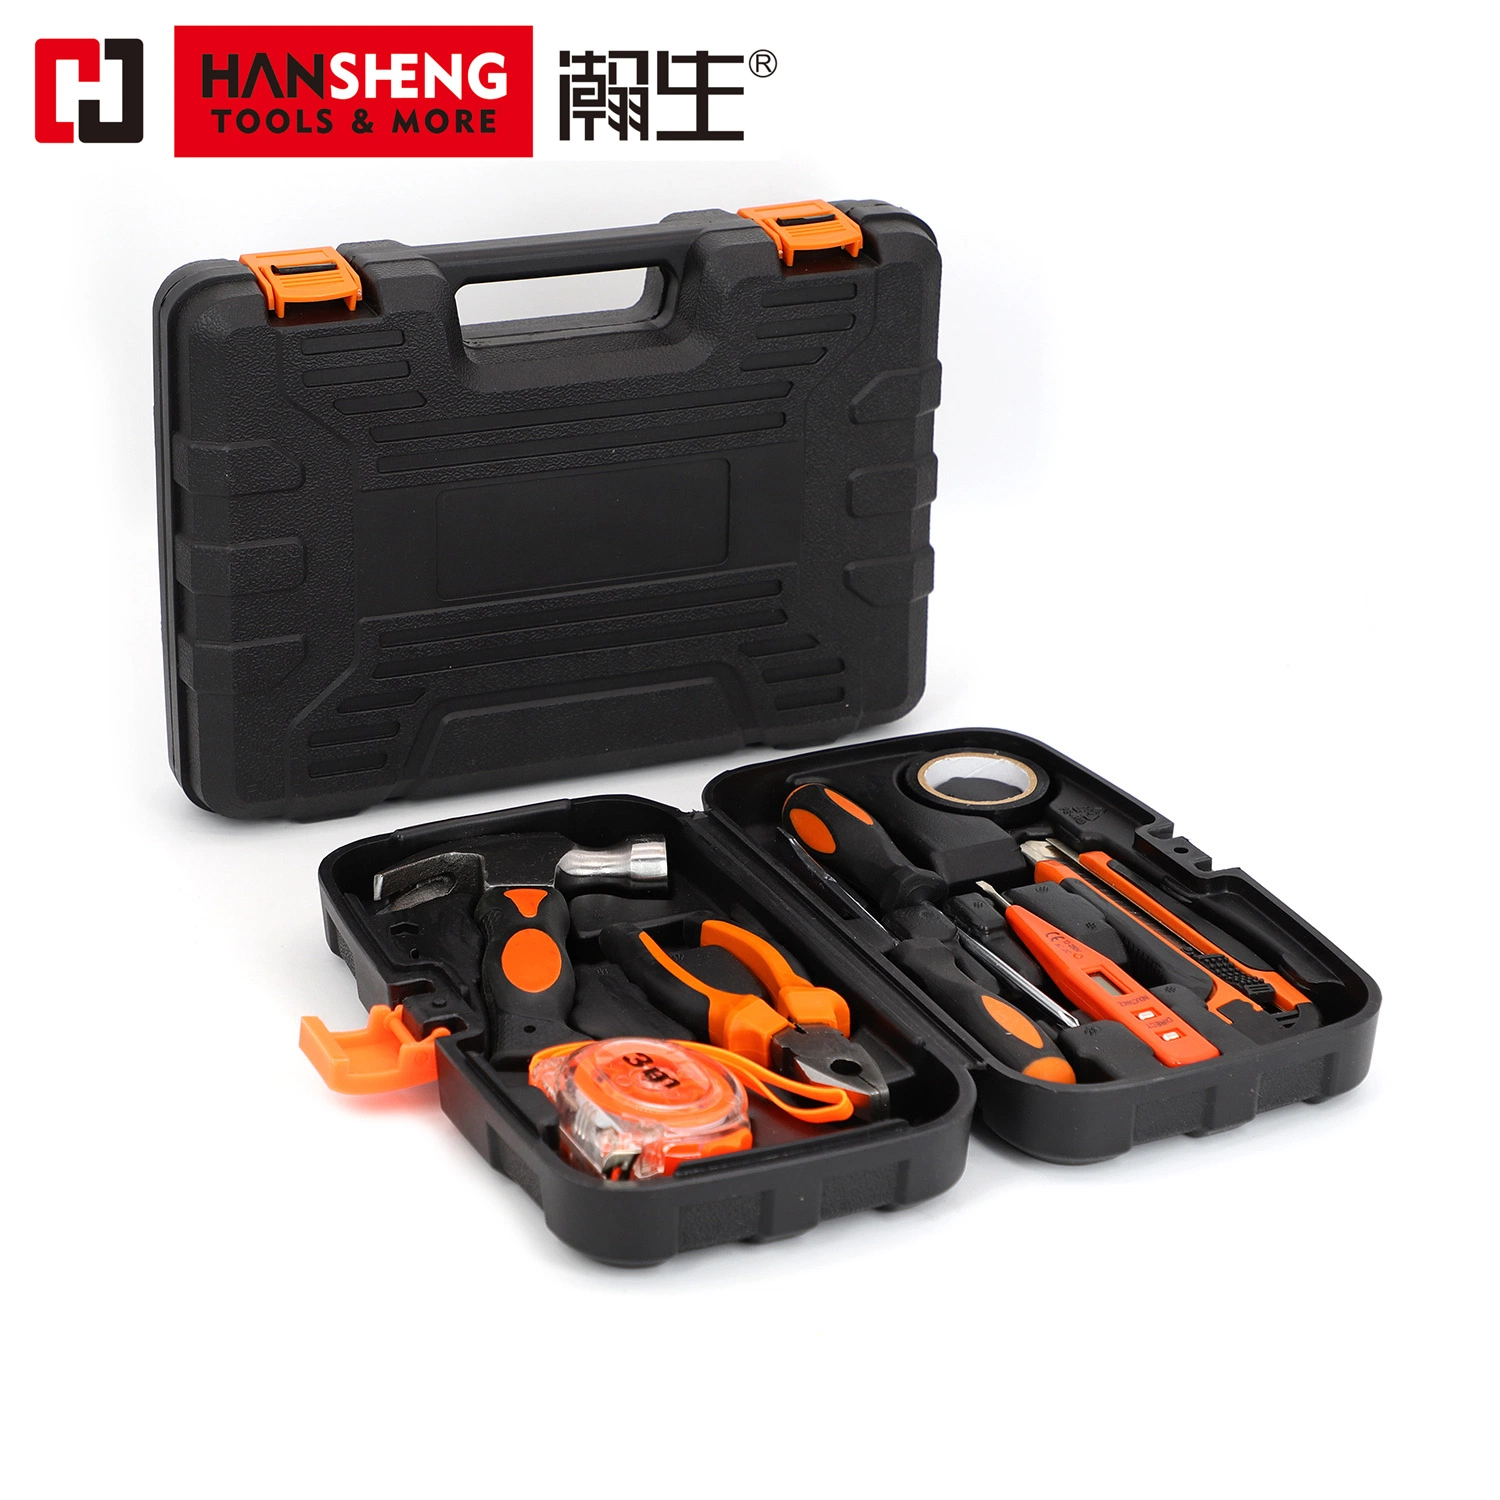 Professional Household Set Tools, Plastic Toolbox, Combination, Set, Gift Tools, Made of Carbon Steel, CRV, Polish, Pliers, Wire Clamp, Hammer, Wrench, Snips